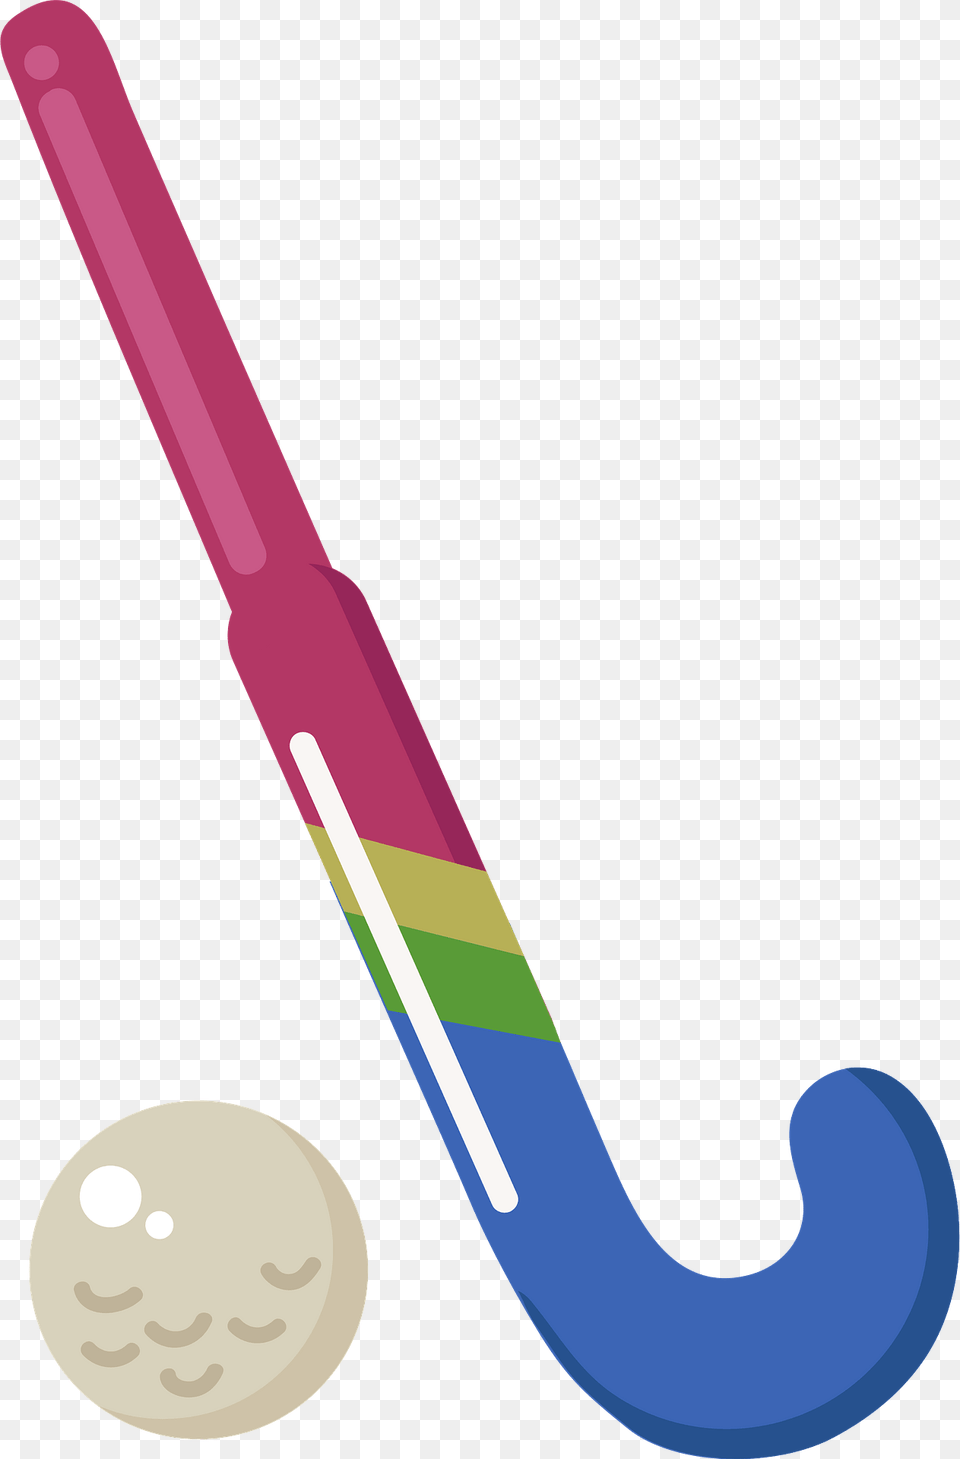 Field Hockey Stick And Ball Clipart, Smoke Pipe Free Transparent Png